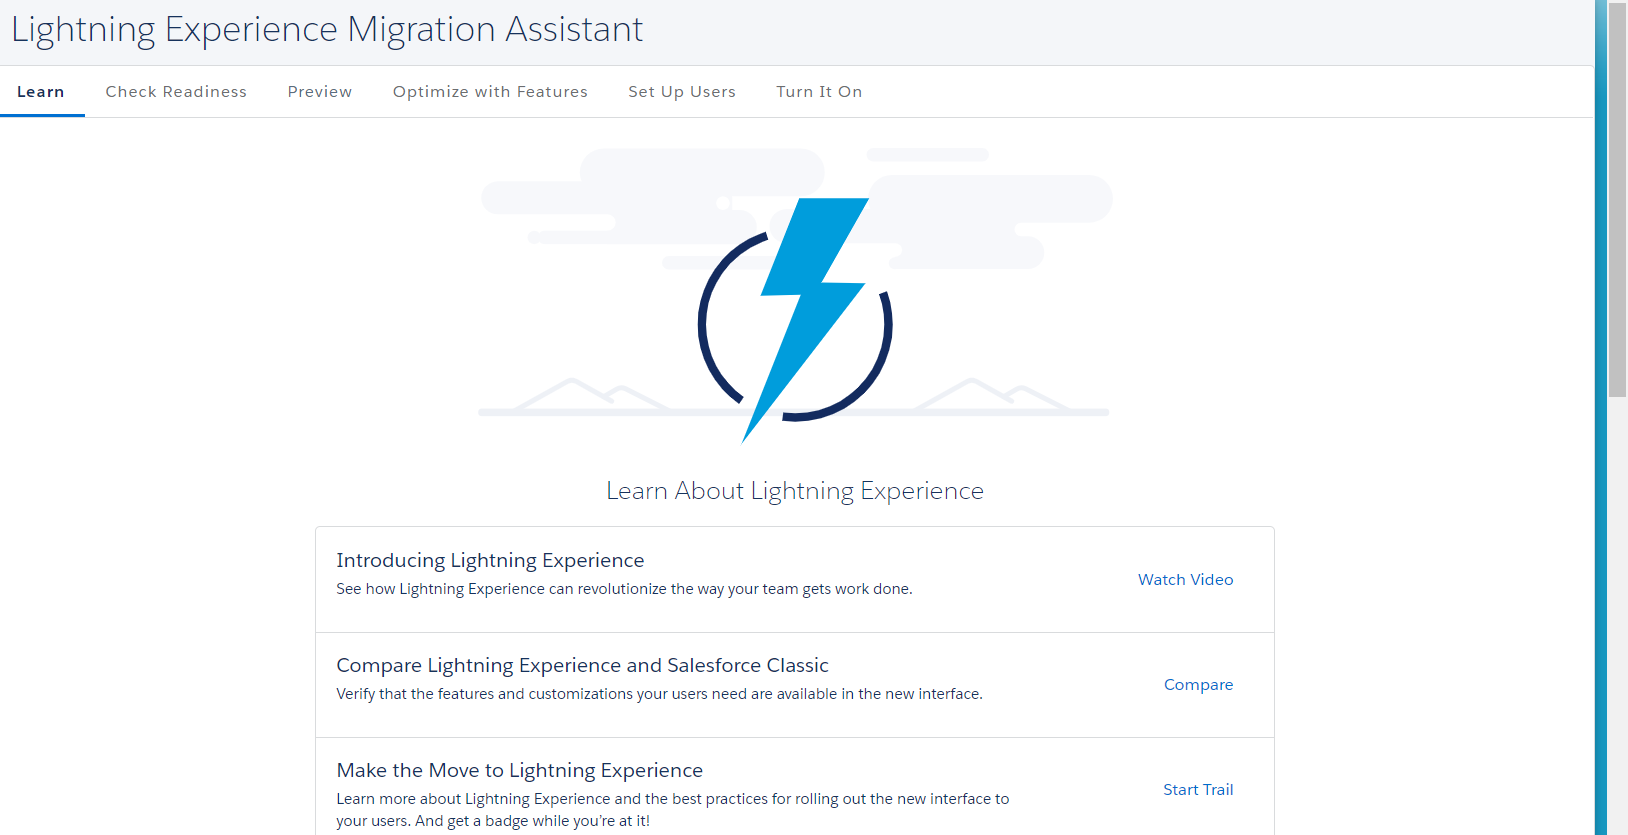 Disabling Lightning Experience for users